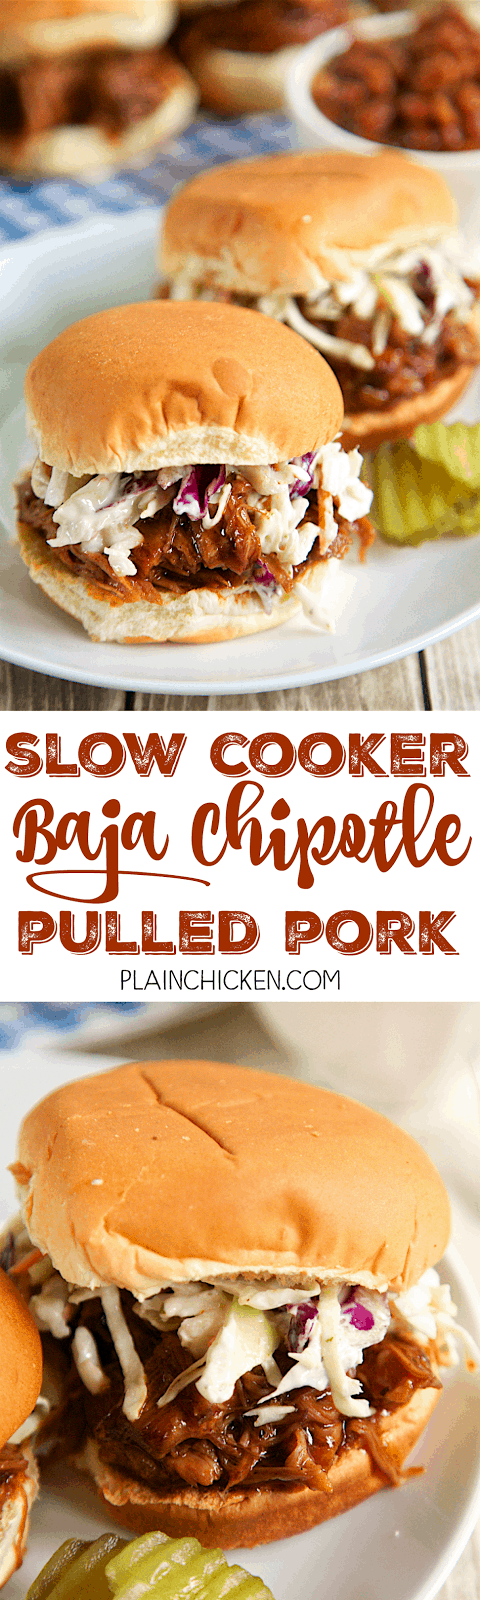 Slow Cooker Baja Chipotle Pulled Pork - only 4 ingredients! A little sweet and a little spicy. Cooks all day in the crock-pot. SO easy and it tastes AMAZING! Great for a crowd and tailgating! Serve as a sandwich, on a baked potato, over a salad or on top of nachos!